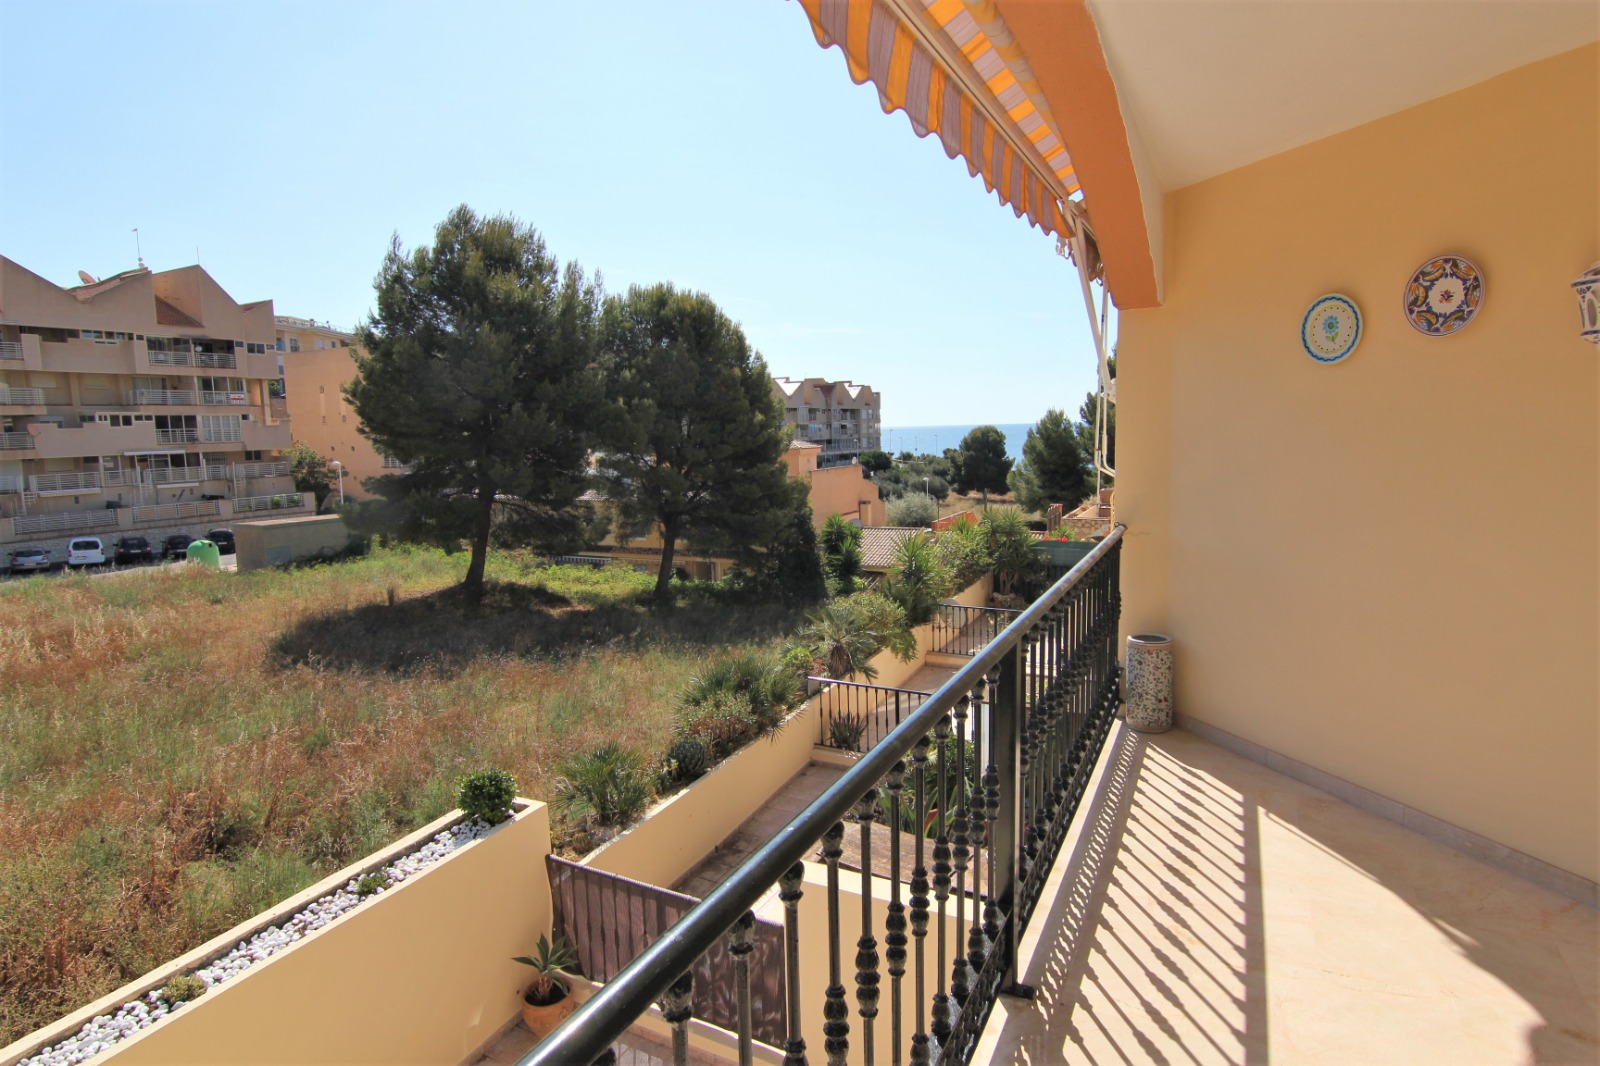 Completely renovated duplex apartment with 2 bedrooms, 2 bathrooms, parking and community pool in la Manzanera, Calpe.